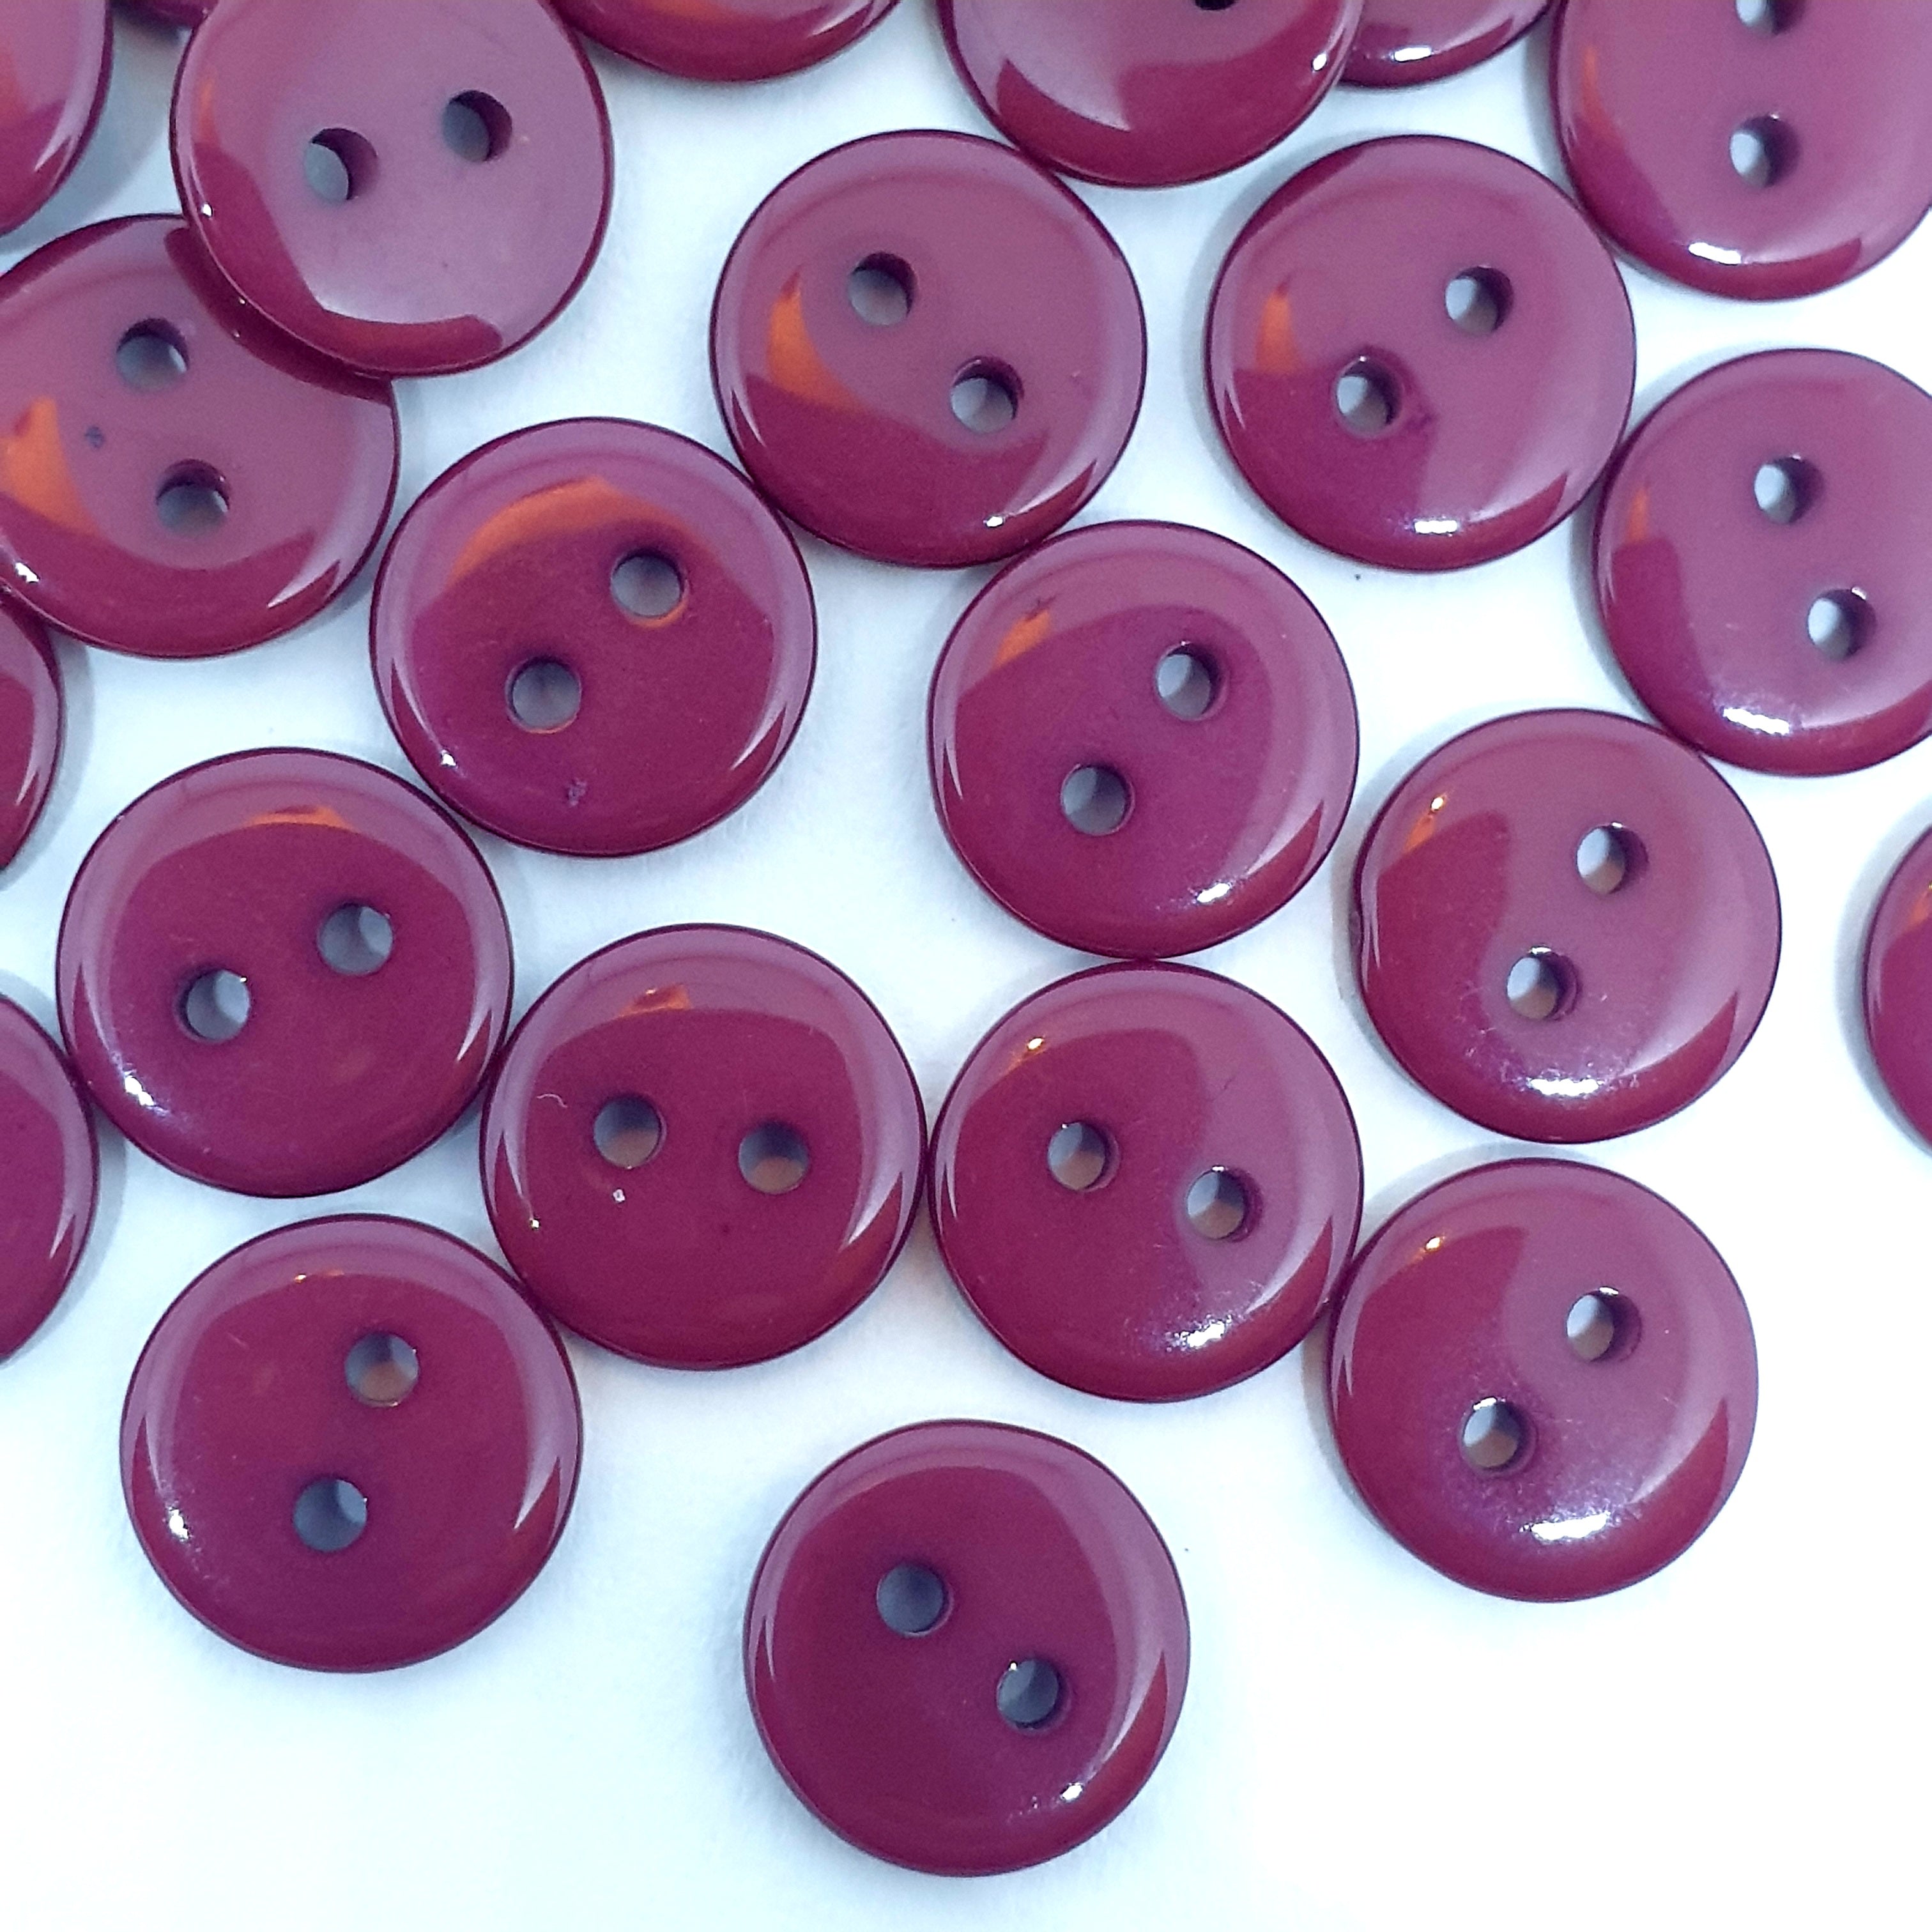 MajorCrafts 120pcs 9mm Plum Purple Small 2 Holes Round Resin Sewing Buttons B26